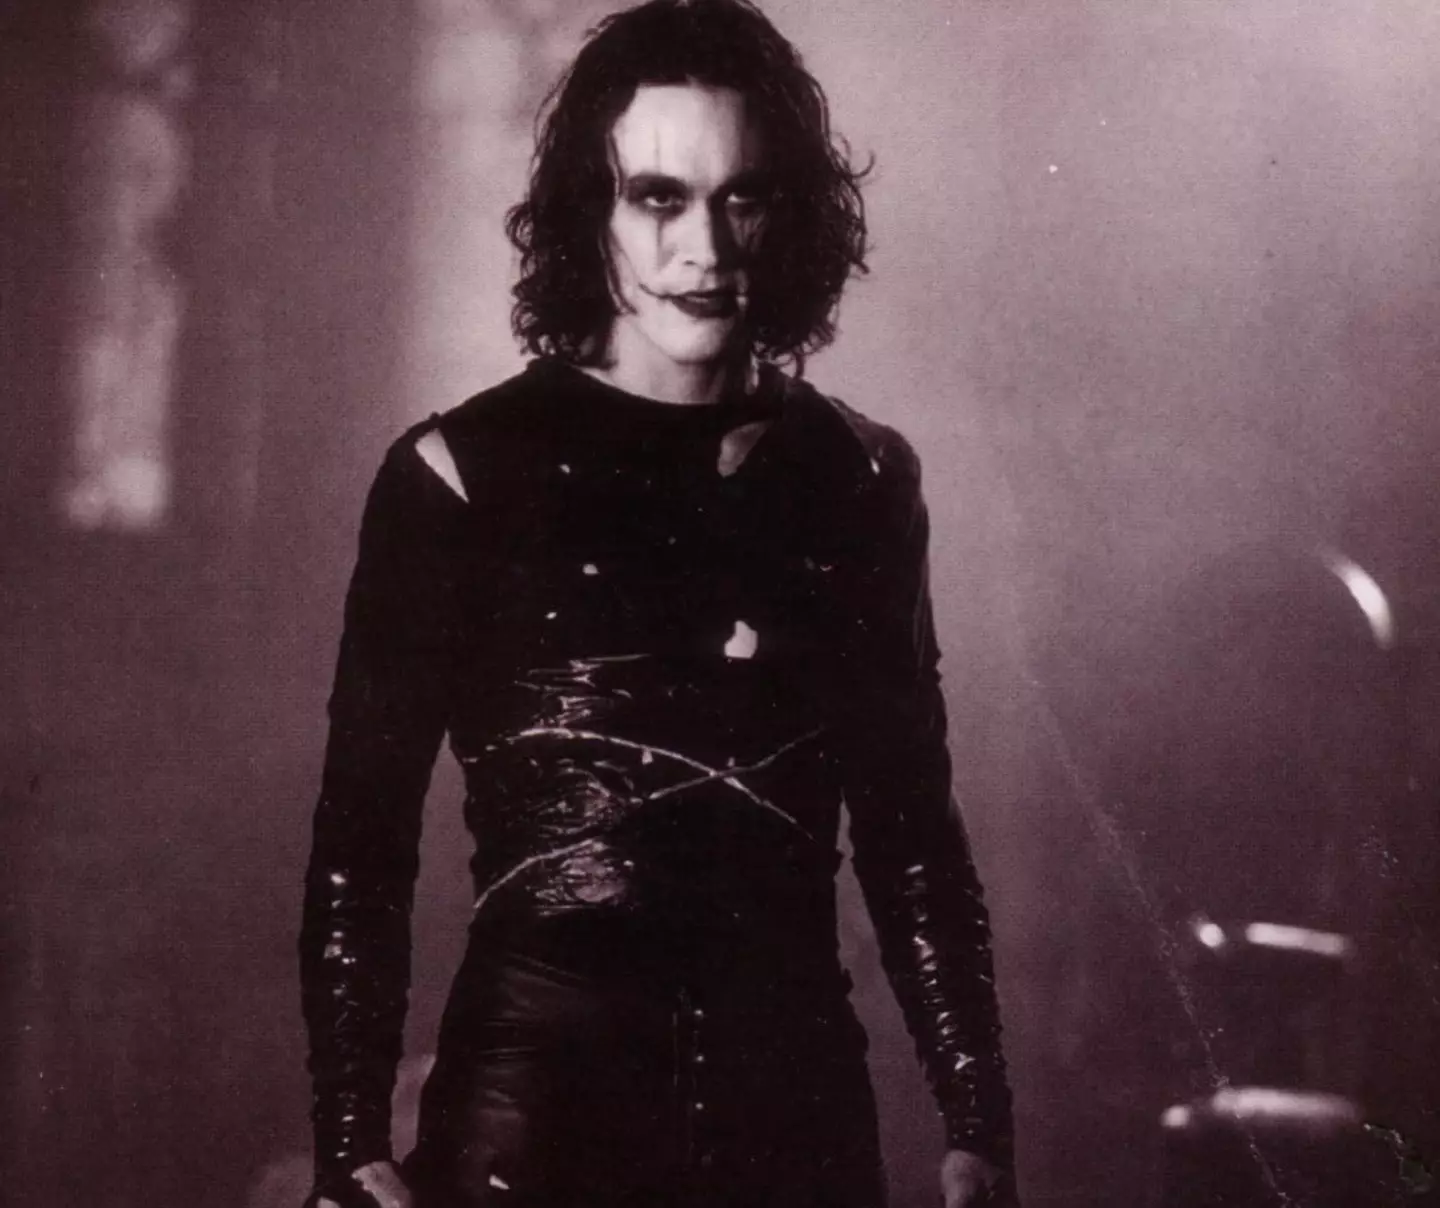 Brandon Lee as Eric Draven in the original The Crow.